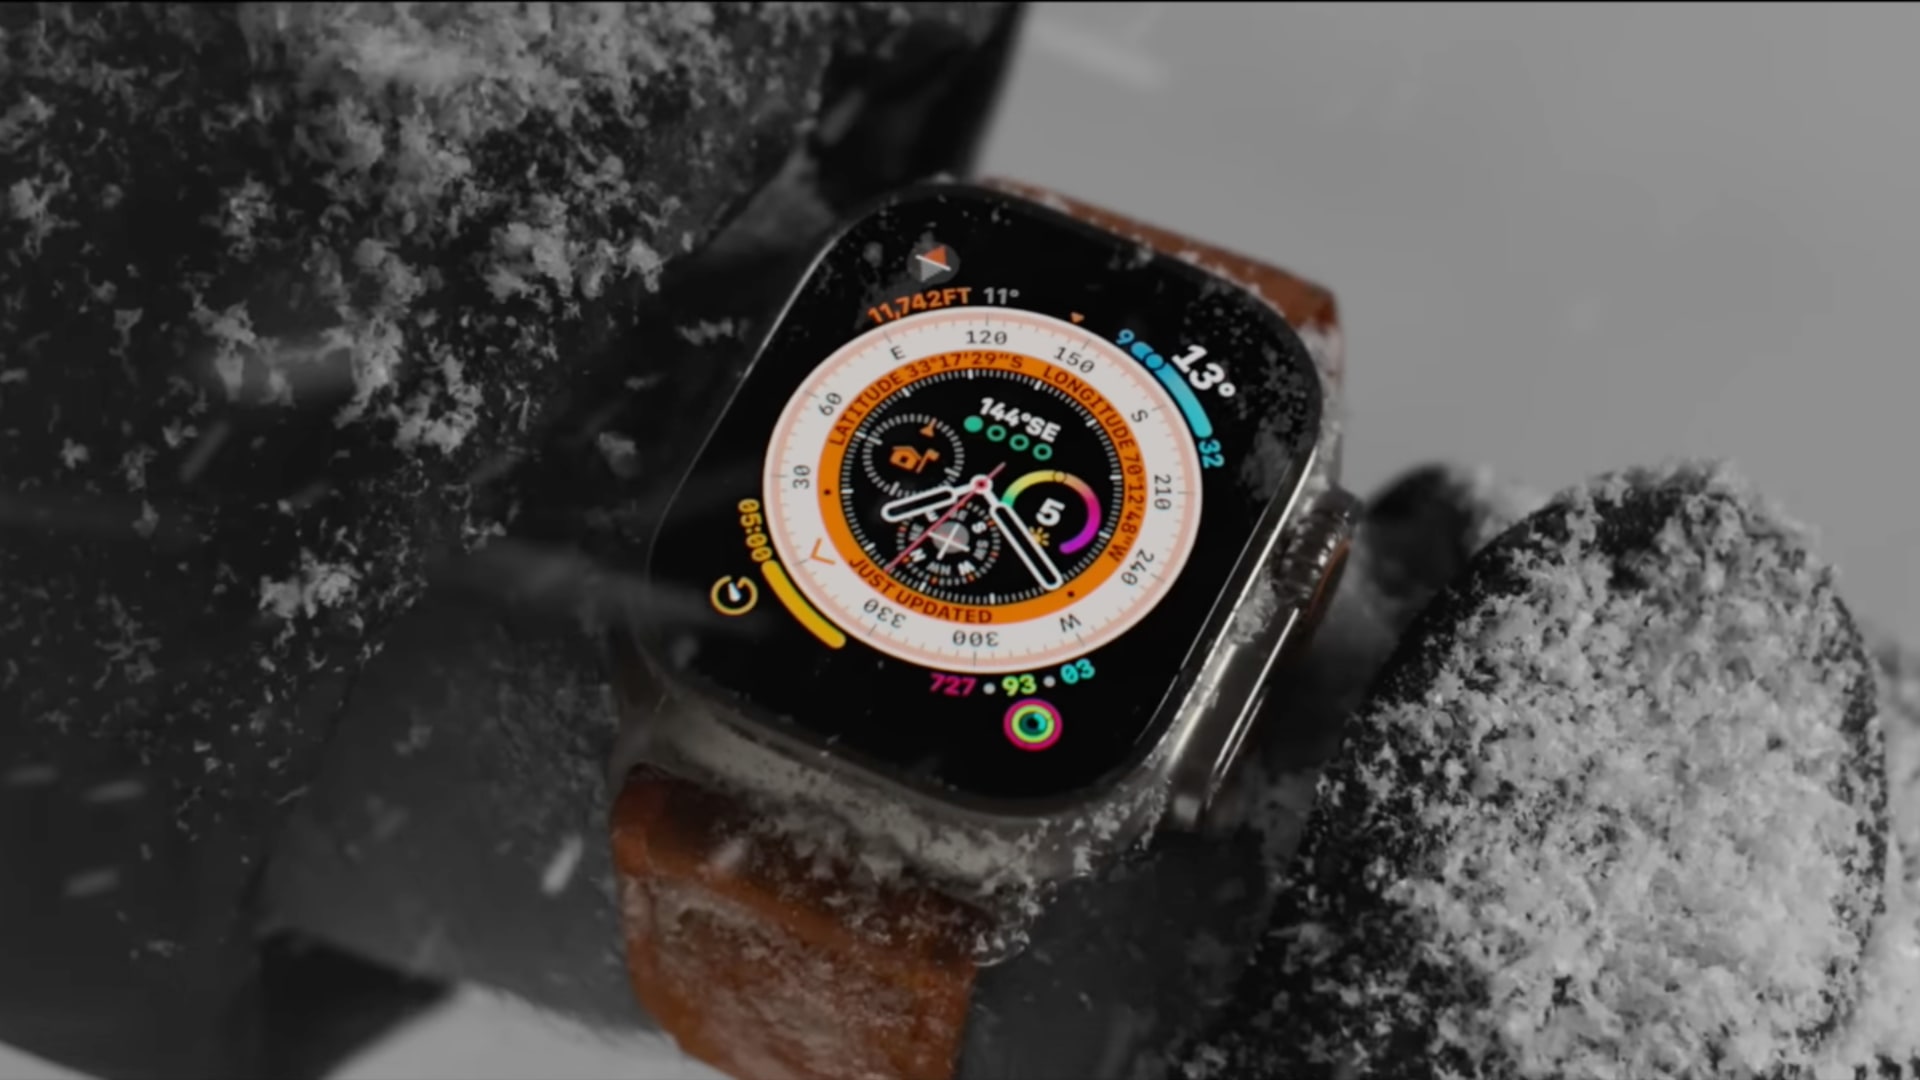 Apple Watch Ultra on a mountain climber's wrist under heavy snow, displaying stats on the Wayfinder face